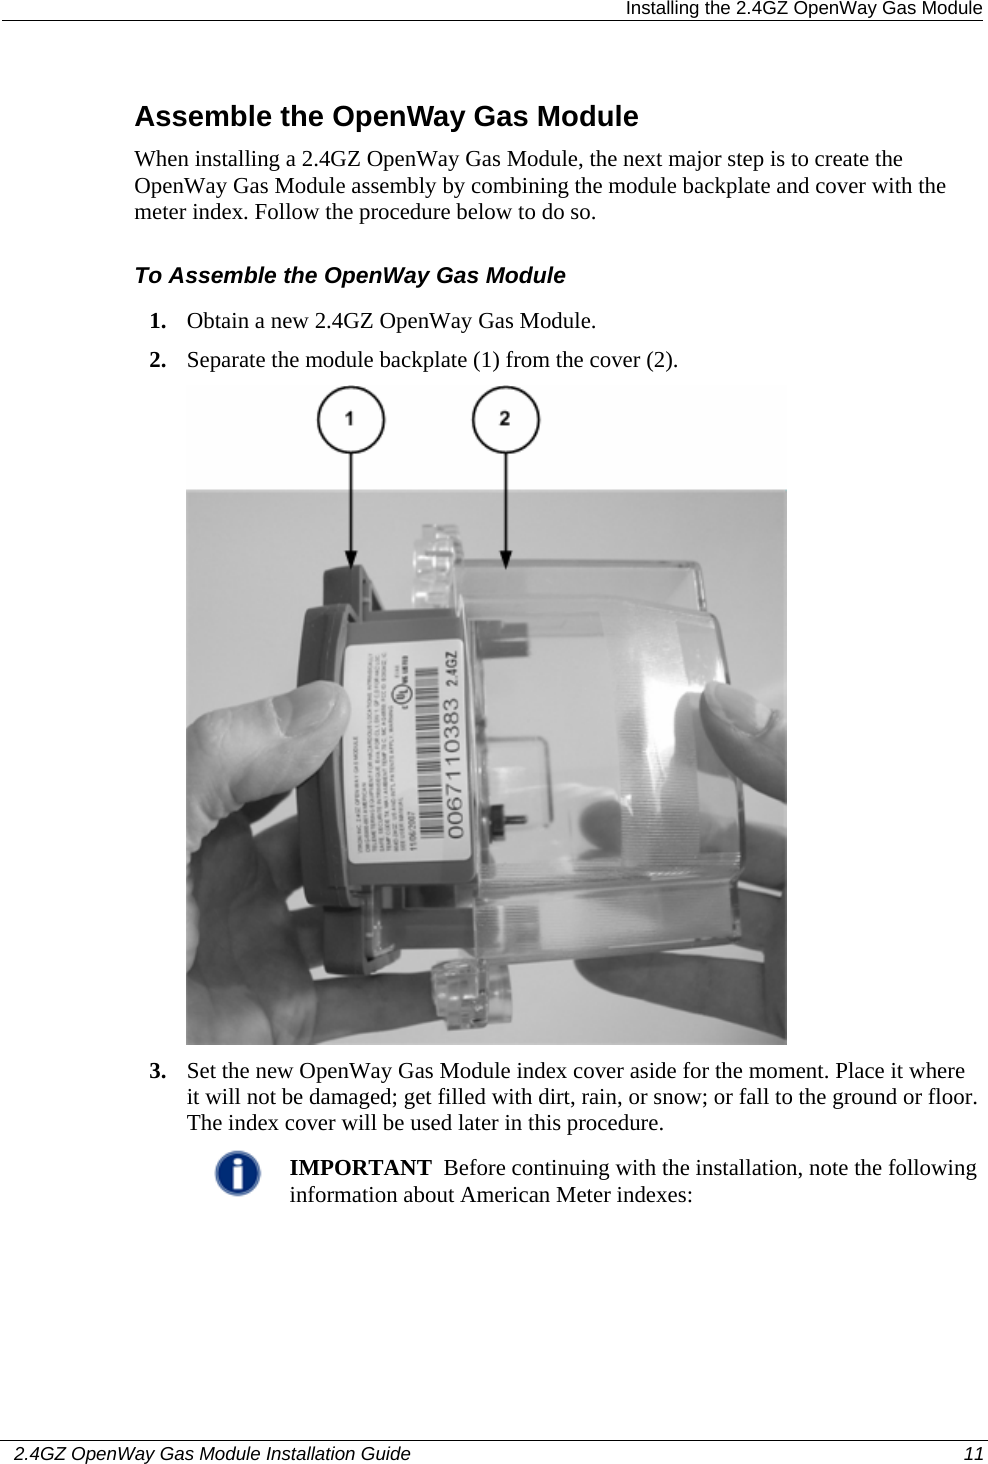  Installing the 2.4GZ OpenWay Gas Module   2.4GZ OpenWay Gas Module Installation Guide  11  Assemble the OpenWay Gas Module When installing a 2.4GZ OpenWay Gas Module, the next major step is to create the OpenWay Gas Module assembly by combining the module backplate and cover with the meter index. Follow the procedure below to do so. To Assemble the OpenWay Gas Module 1. Obtain a new 2.4GZ OpenWay Gas Module. 2. Separate the module backplate (1) from the cover (2).    3. Set the new OpenWay Gas Module index cover aside for the moment. Place it where it will not be damaged; get filled with dirt, rain, or snow; or fall to the ground or floor. The index cover will be used later in this procedure.   IMPORTANT  Before continuing with the installation, note the following information about American Meter indexes:  